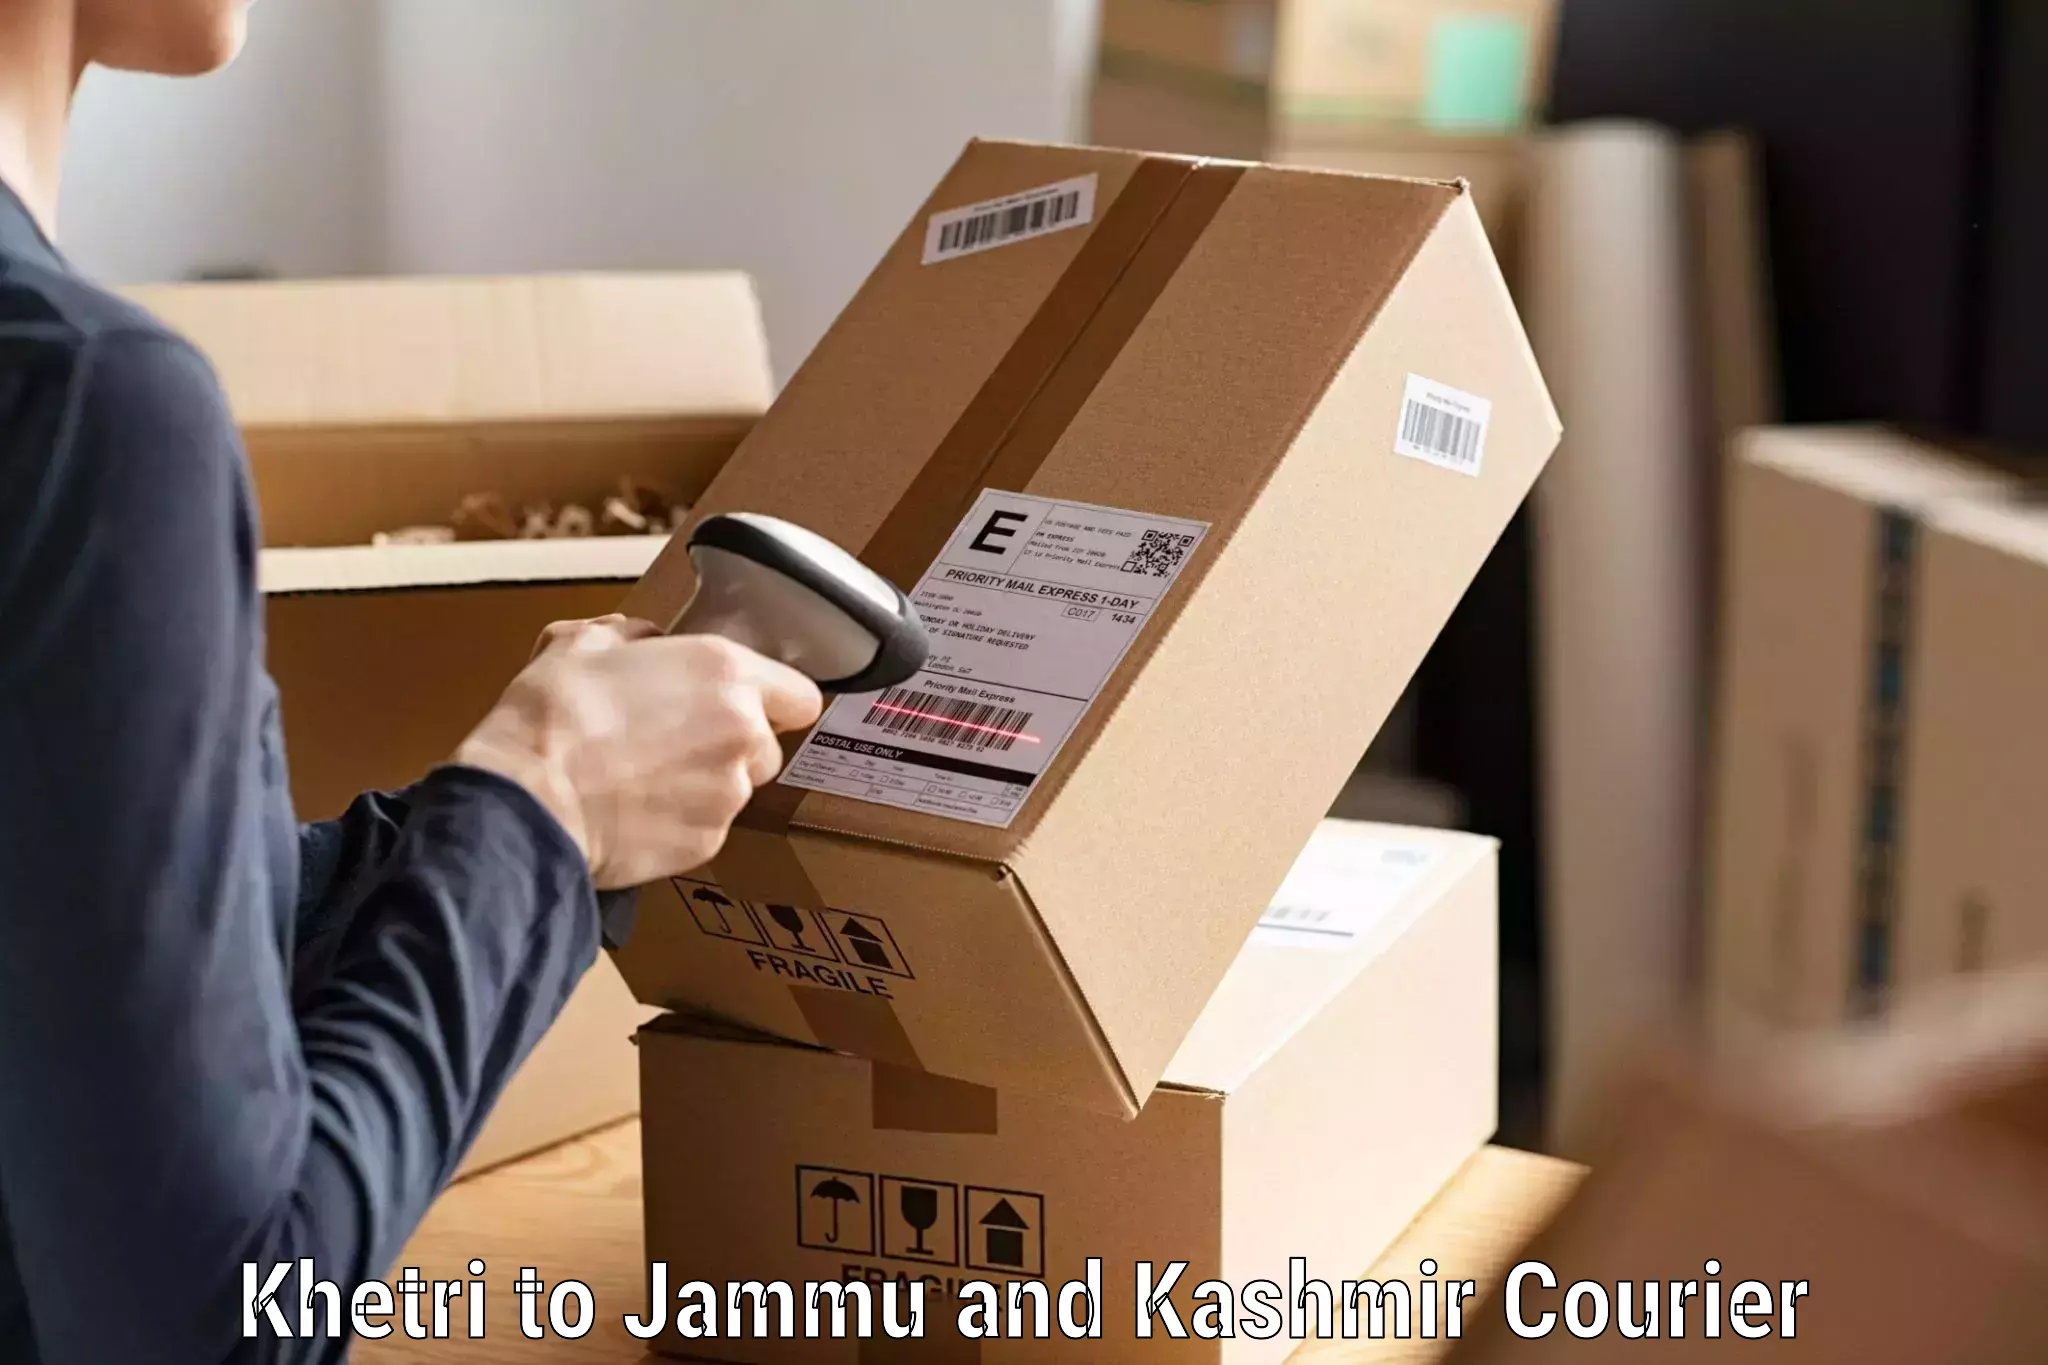 Courier service innovation in Khetri to Katra